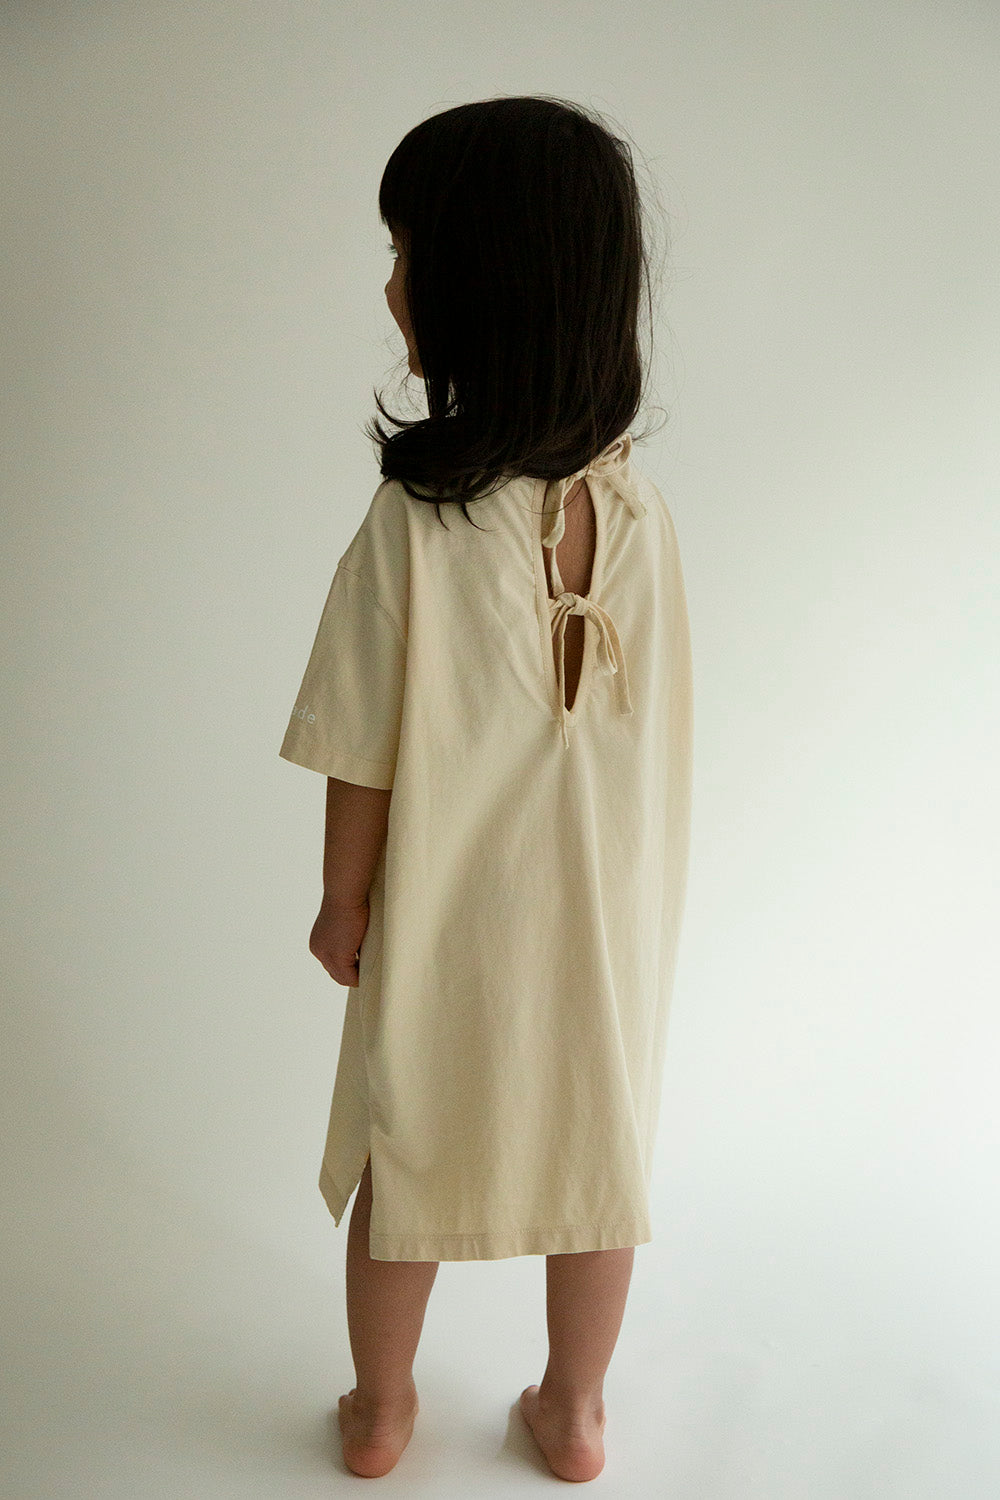 Façade Soleil Tee Dress with Ribbons in Butter